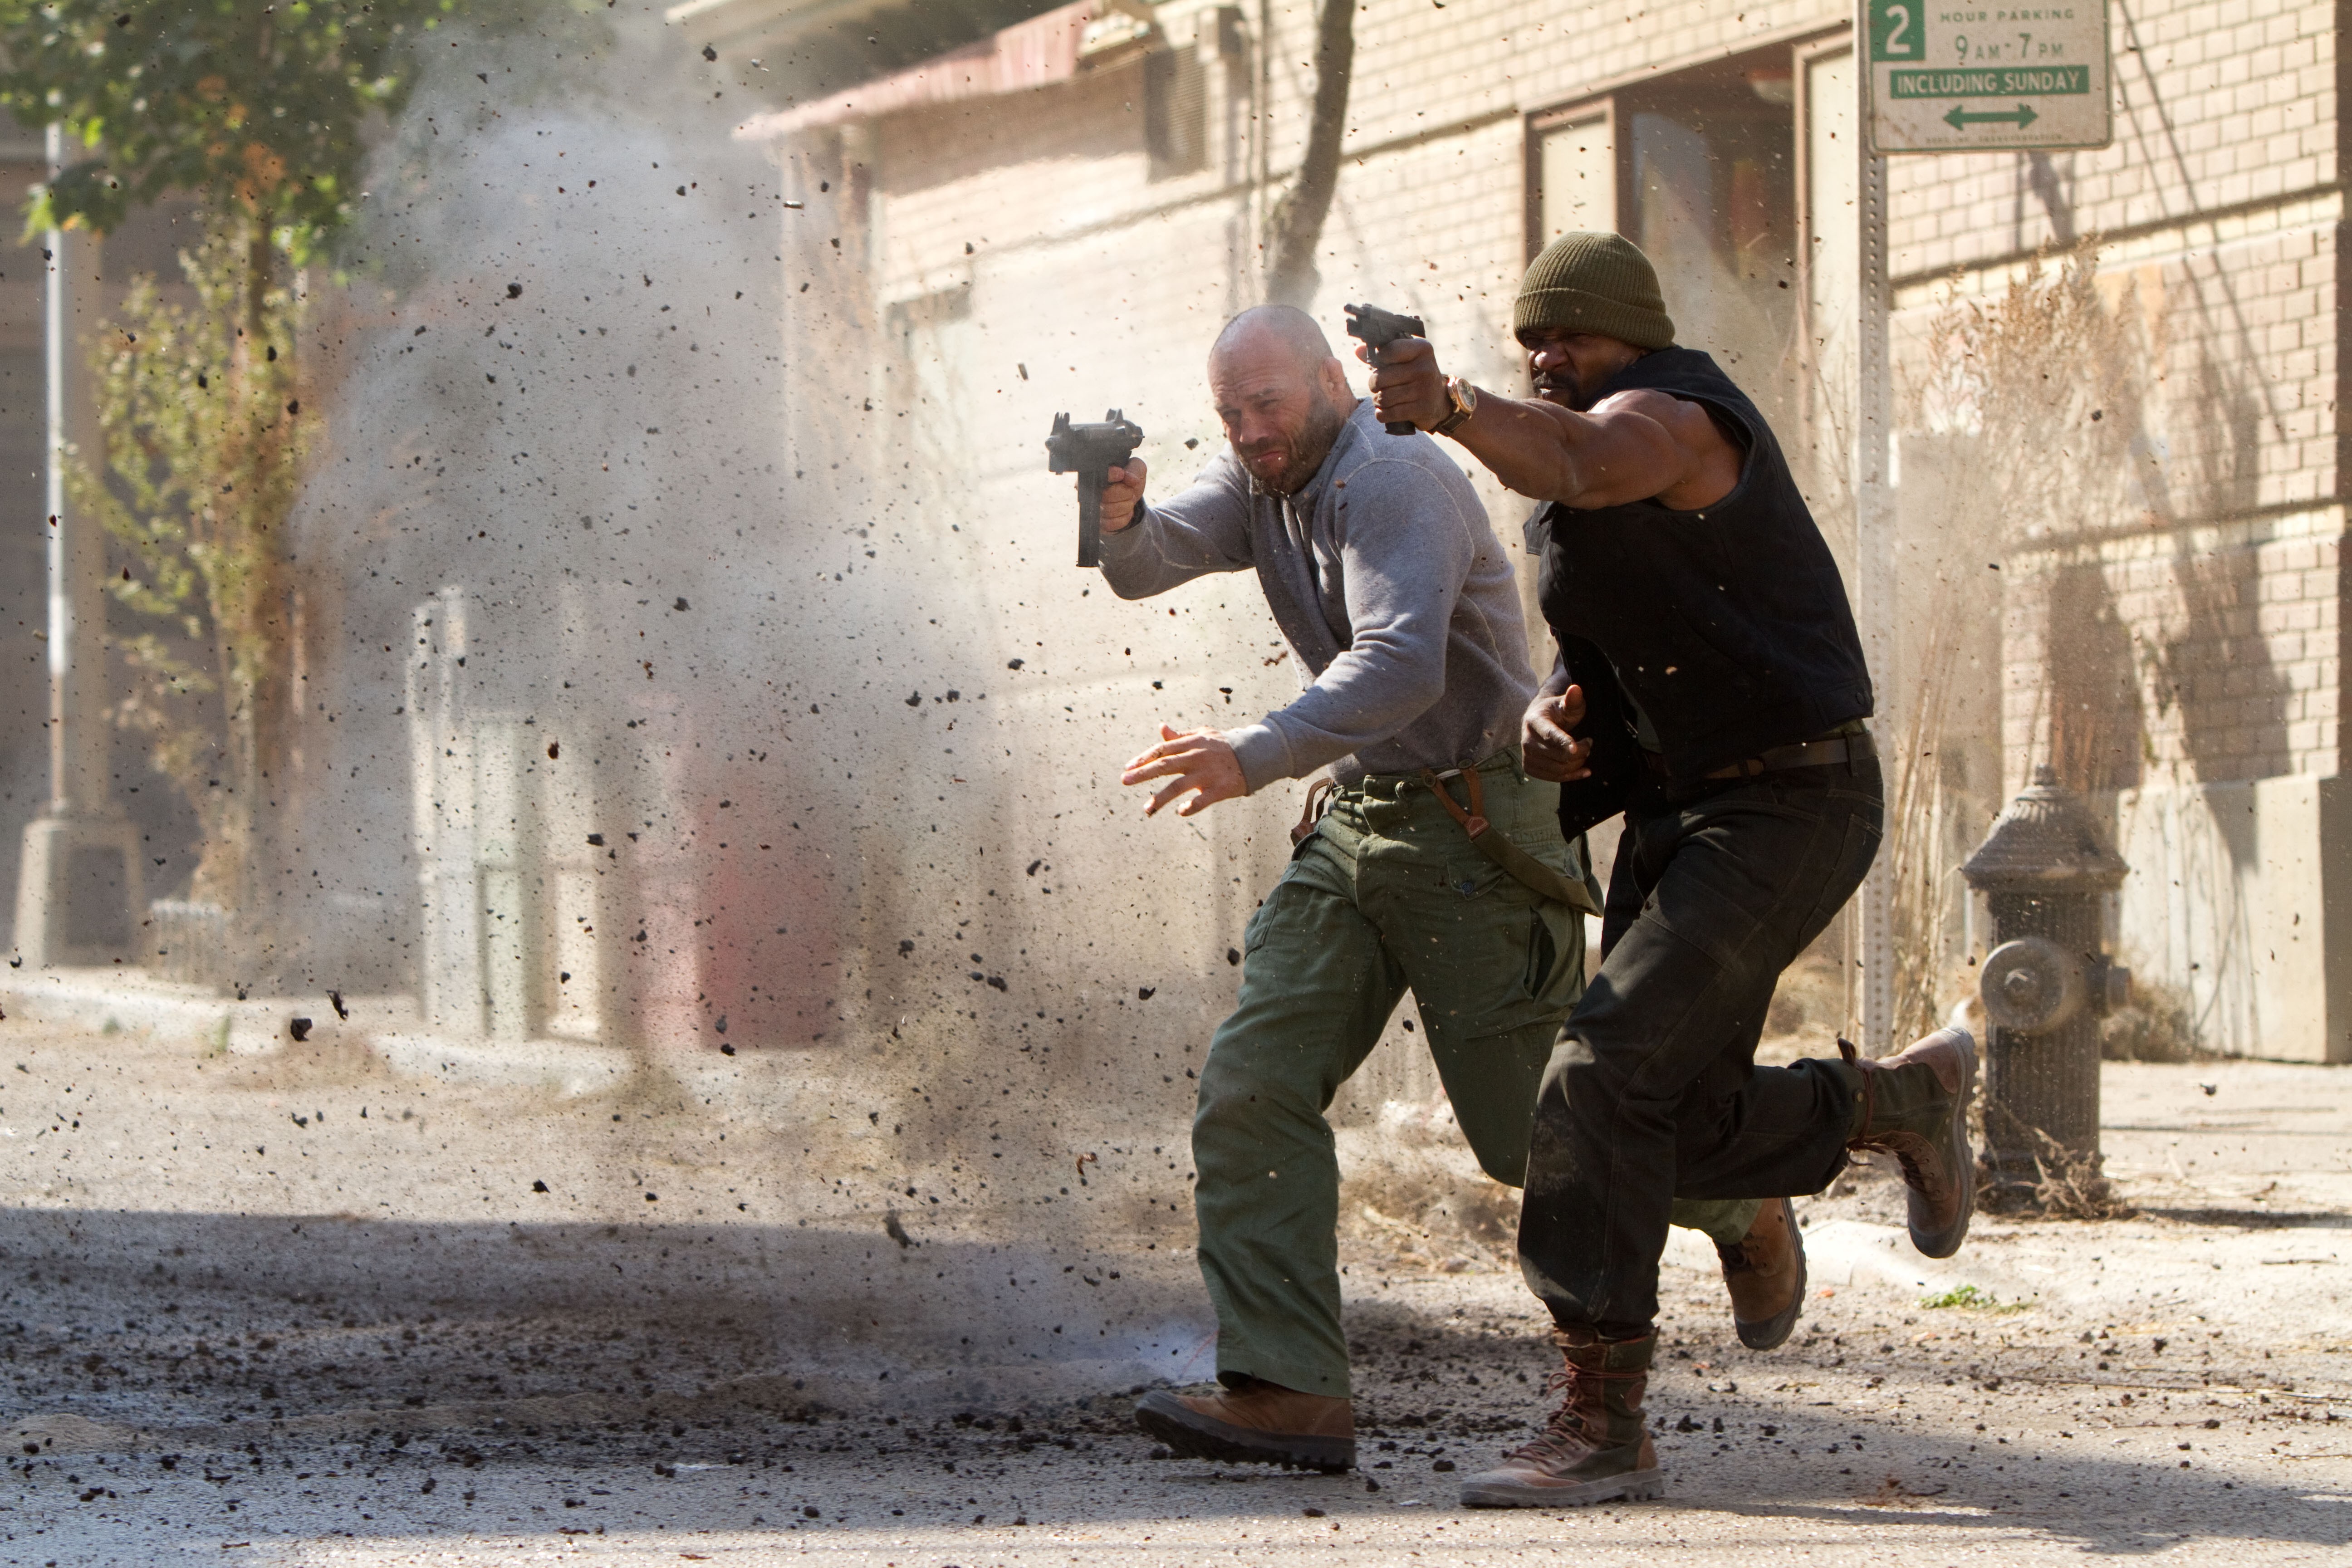 movie, the expendables 2, hale caesar, randy couture, terry crews, toll road, the expendables